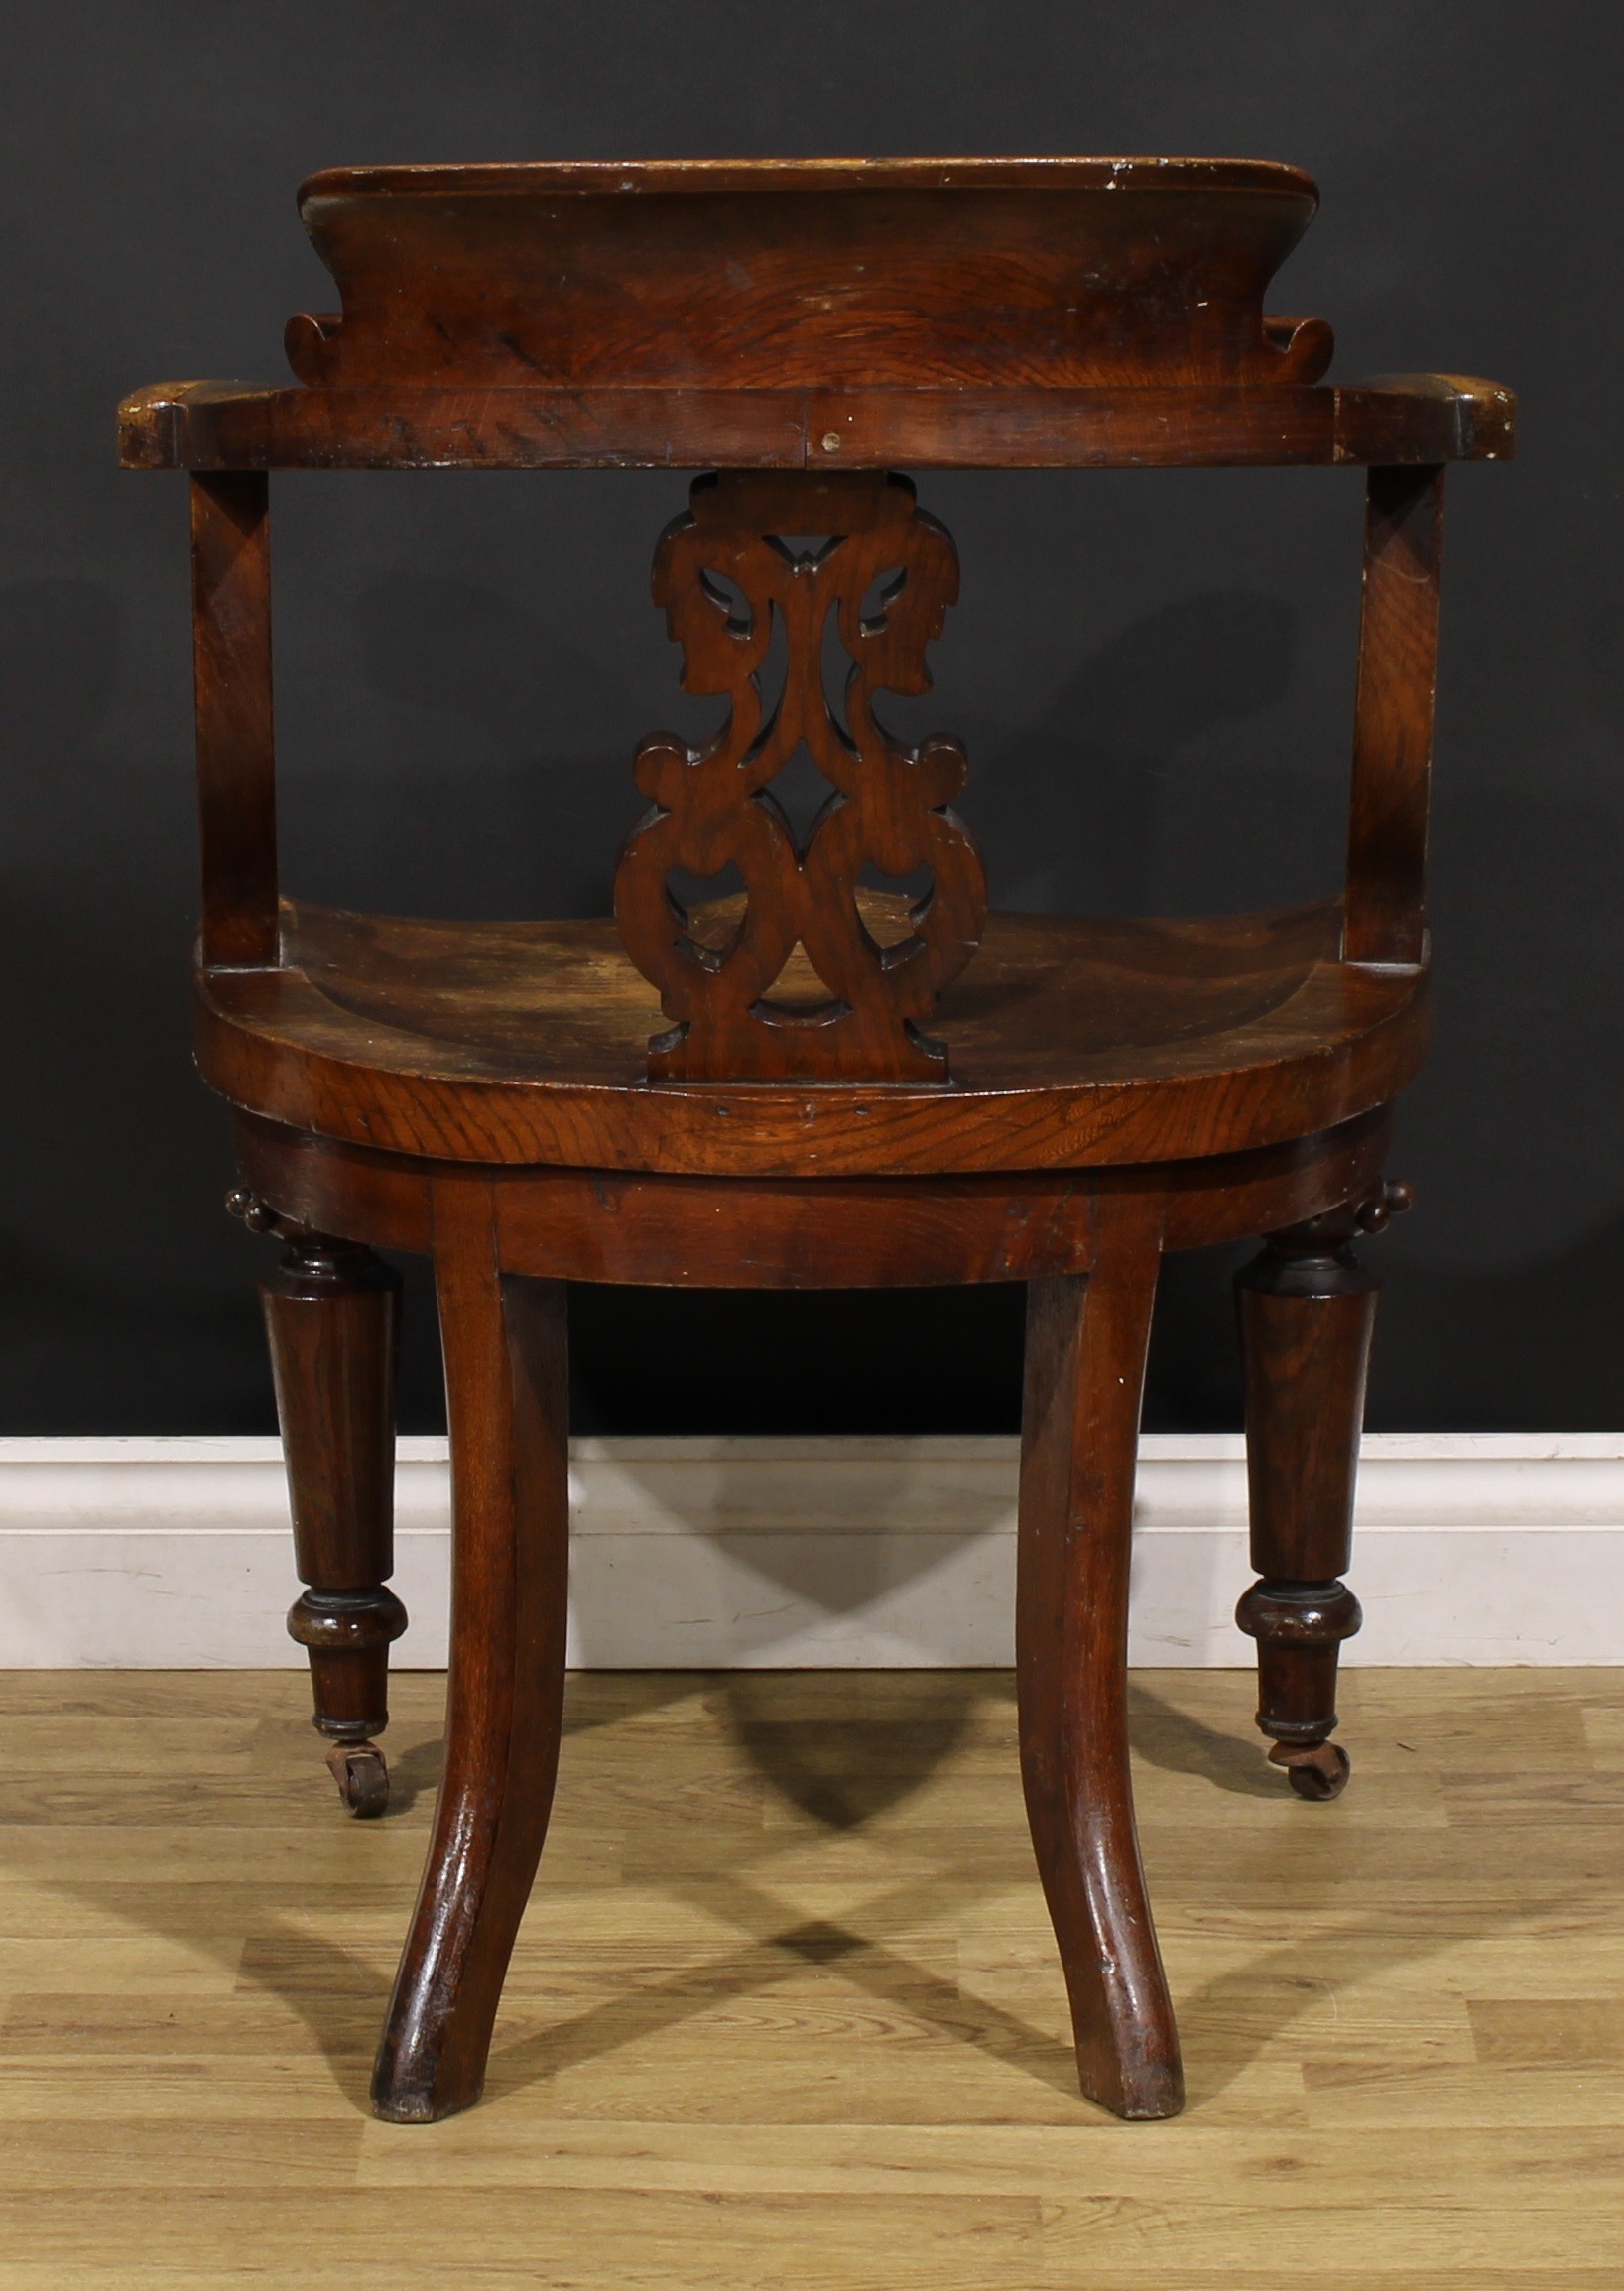 A Victorian oak desk chair, by Thomas Simpson & Sons, Halifax, Yorkshire (fl.1876-1954), badged, - Image 4 of 4